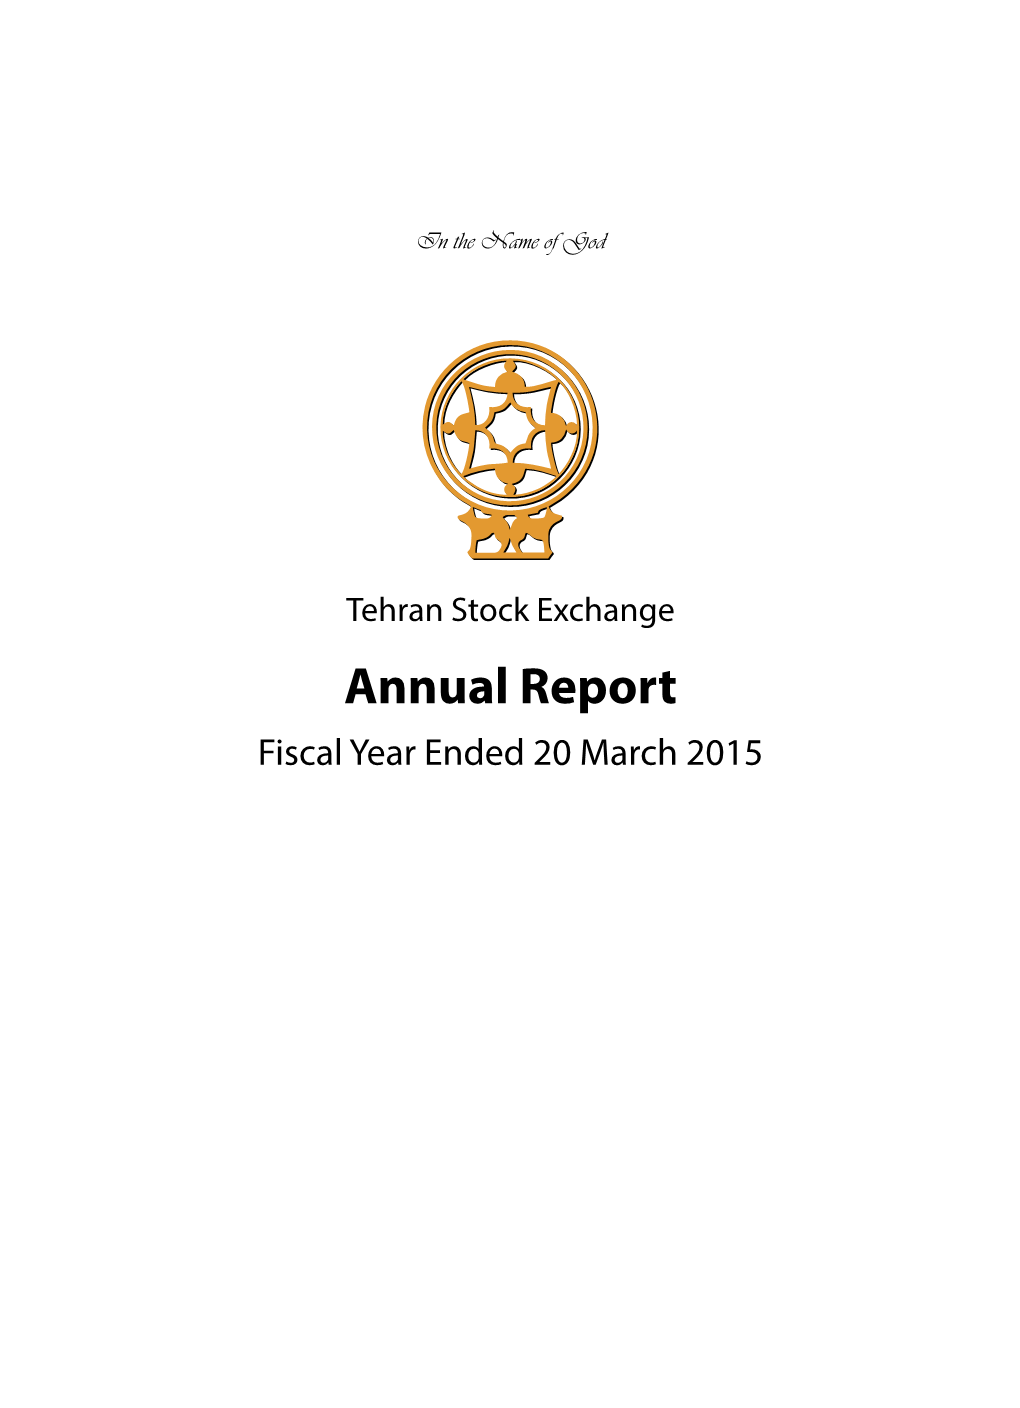 Tehran Stock Exchange Annual Report Fiscal Year Ended 20 March 2015